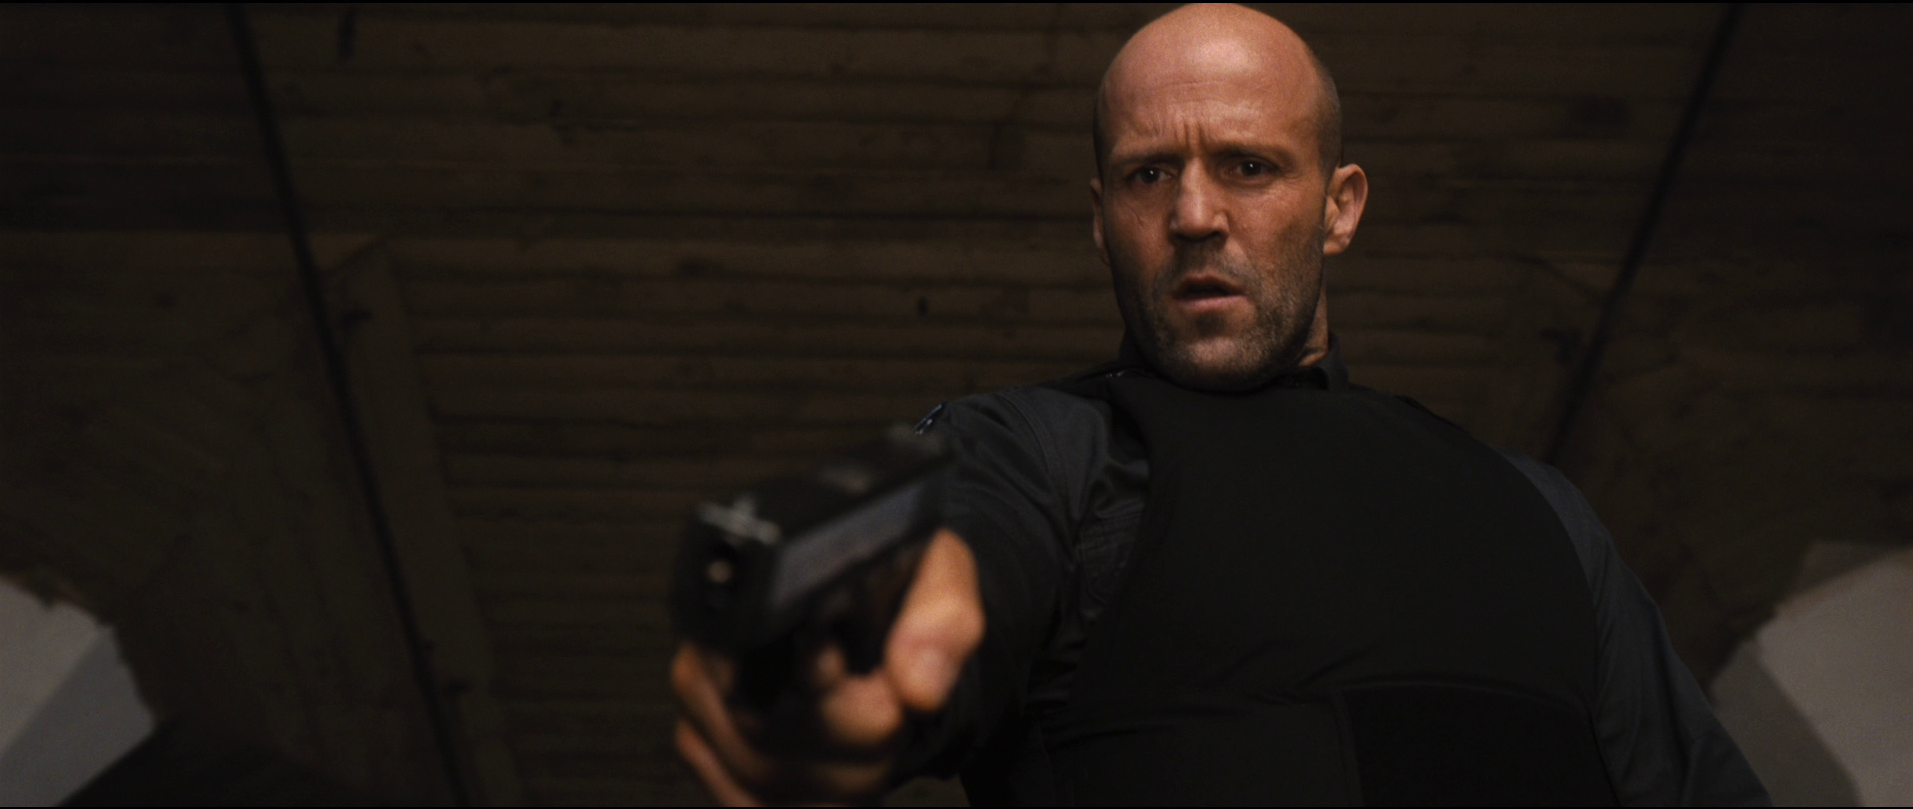 Jason Statham, wearing a bulletproof vest, points a pistol towards the camera in Wrath of Man.